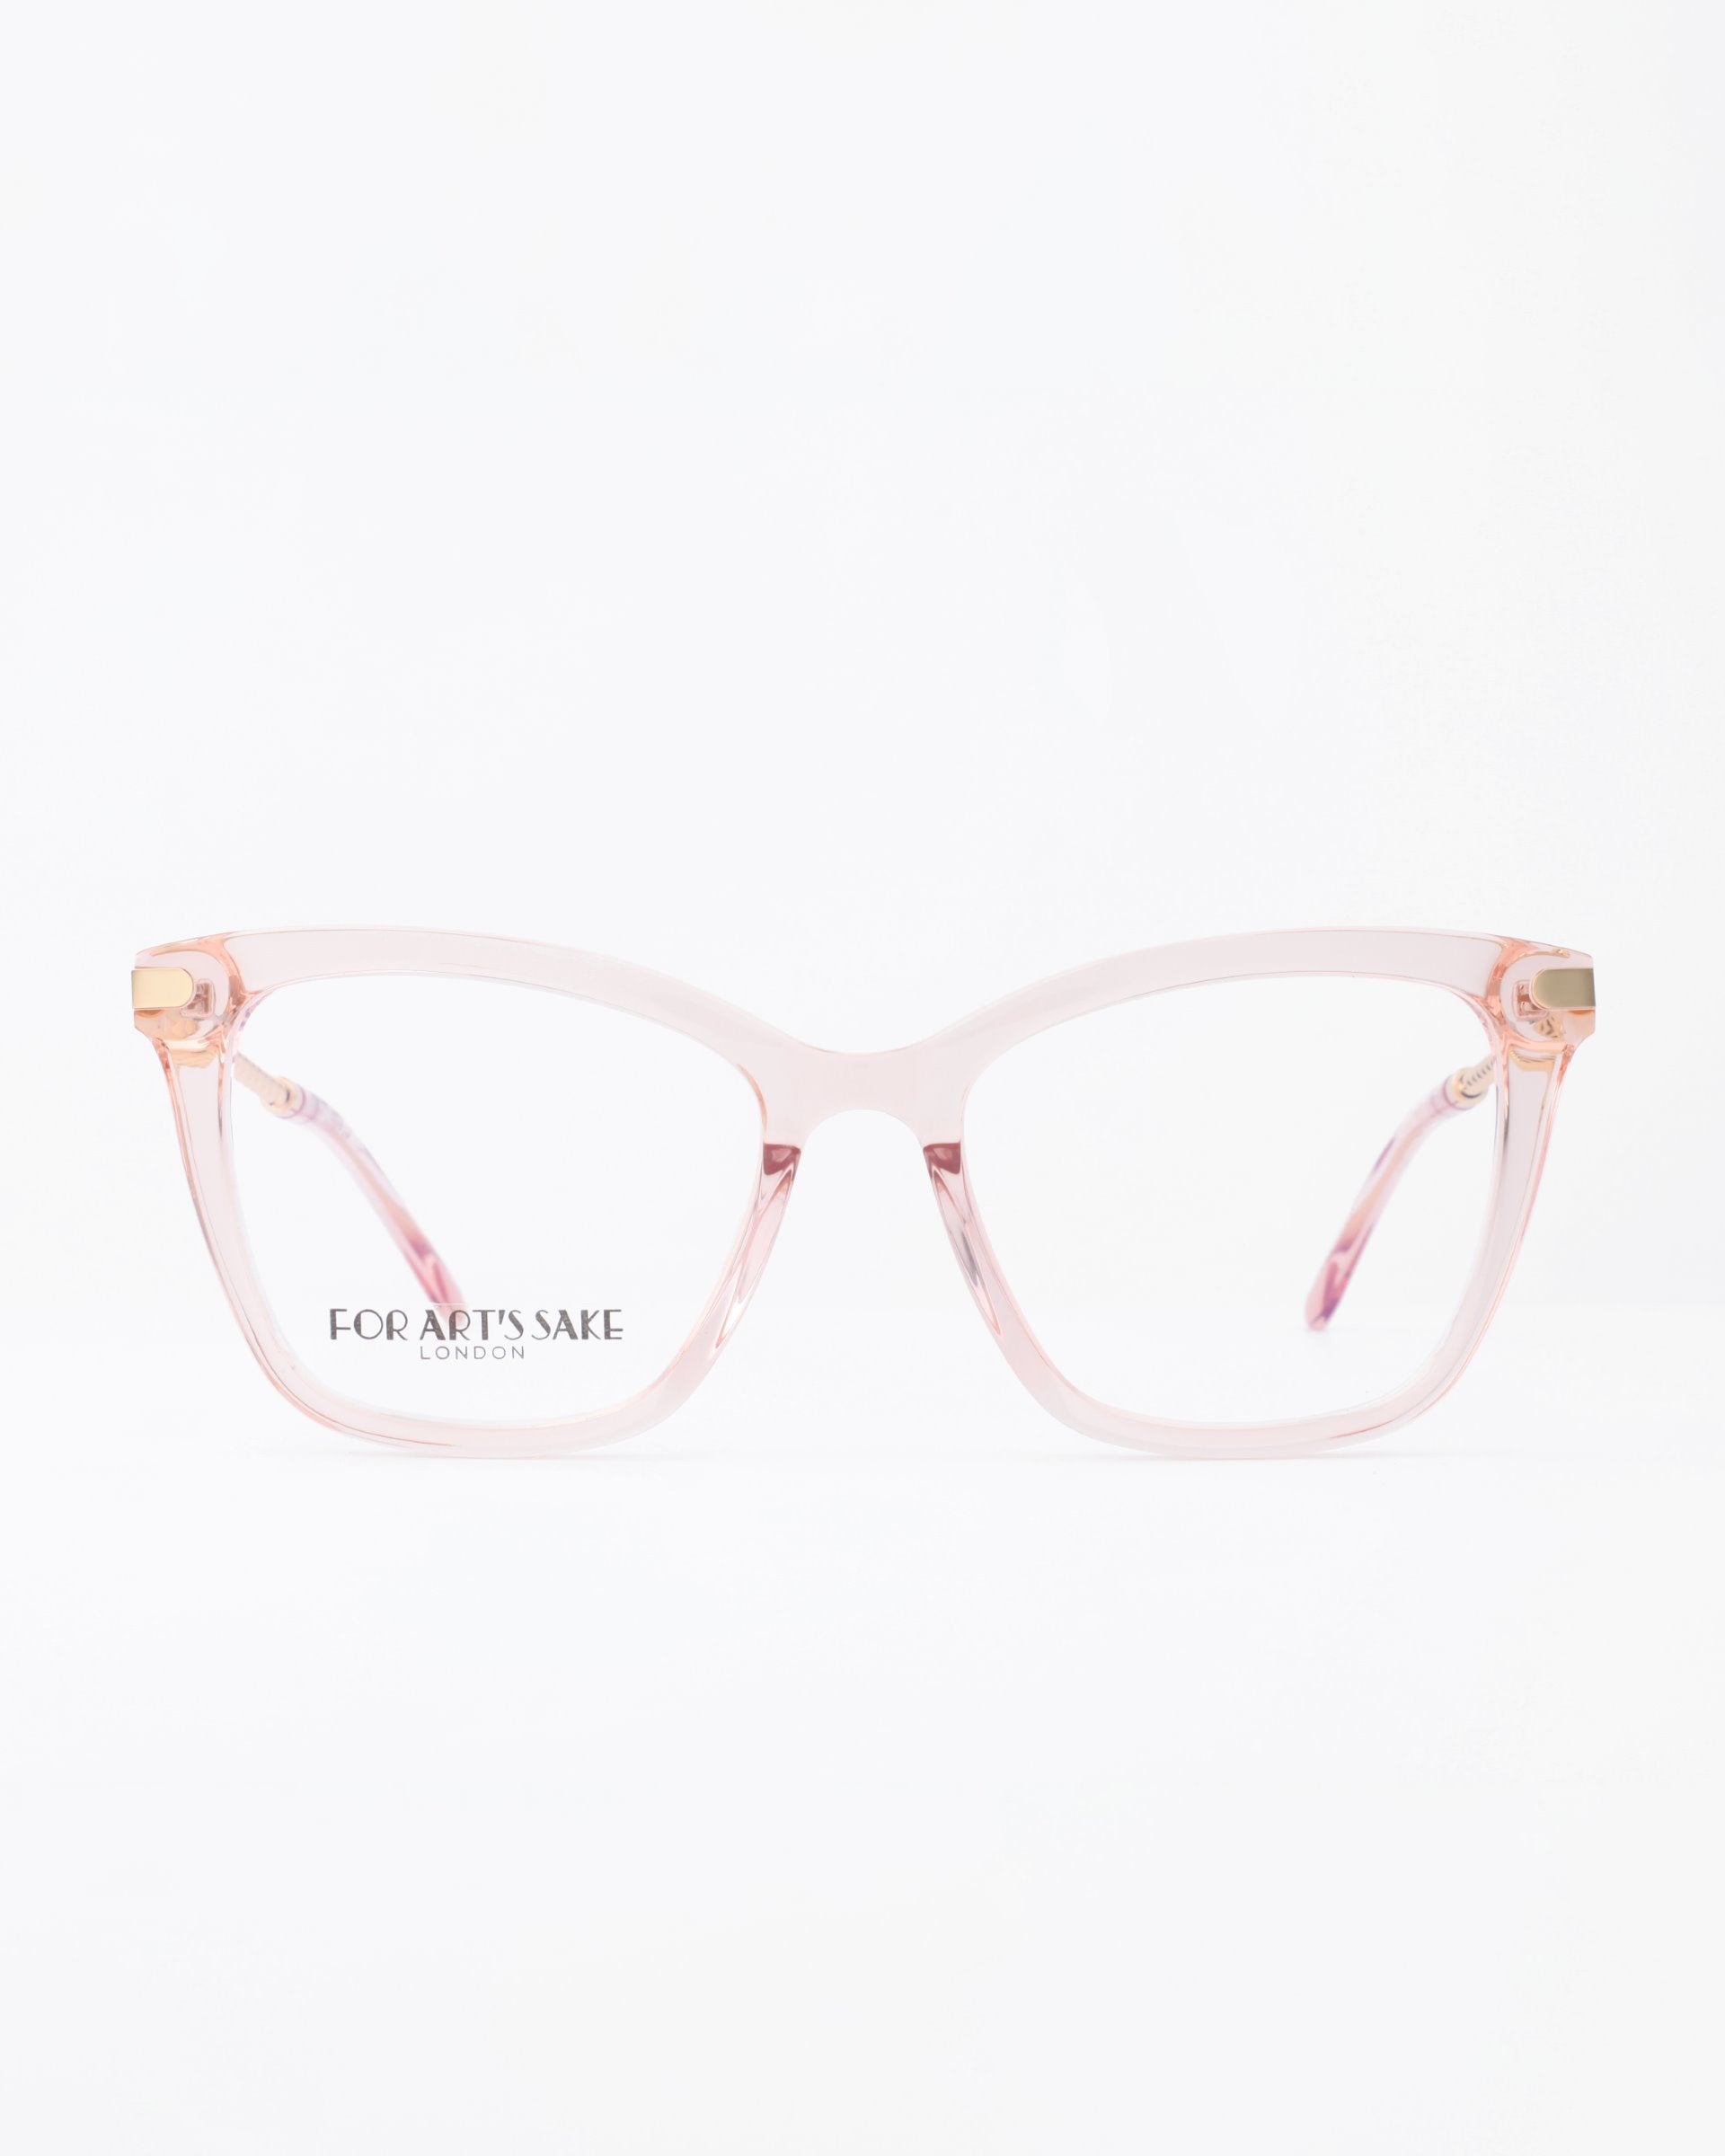 A pair of stylish, transparent pink eyeglasses with a slight cat-eye shape and gold accents on the hinges. The brand For Art's Sake® is printed on the left lens. Featuring blue light filter technology, they're perfect for modern lifestyles. The plain white background highlights the Paris Two eyeglasses beautifully.